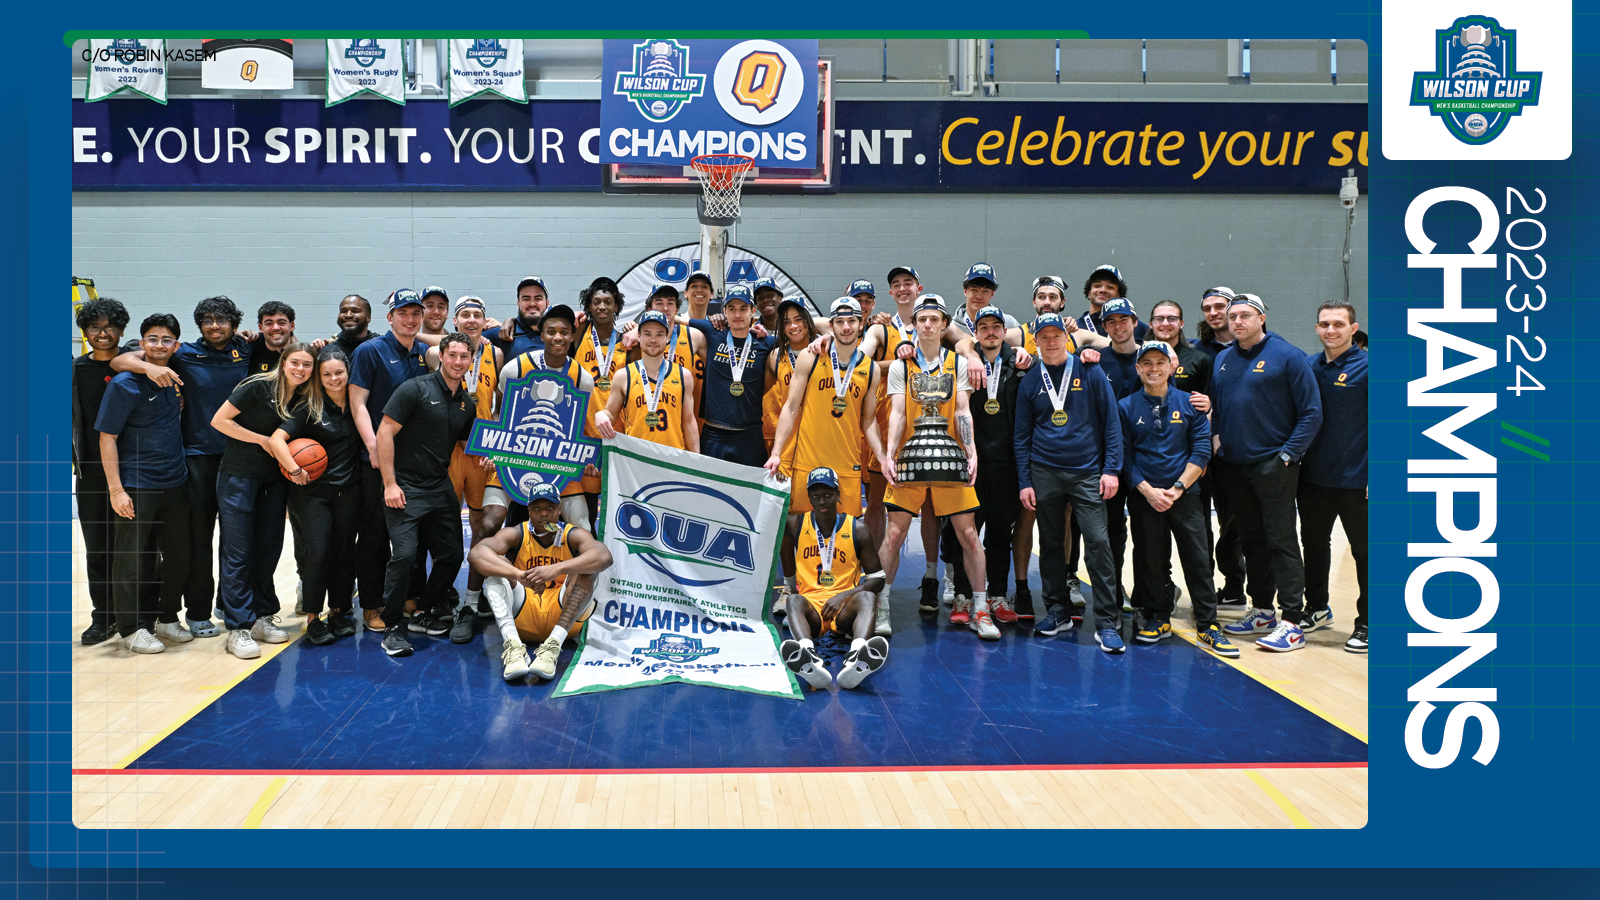 Predominantly blue graphic covered mostly by 2023-24 OUA Men's Basketball Championship banner photo, with the corresponding championship logo and white text reading '2023-24 Champions' on the right side